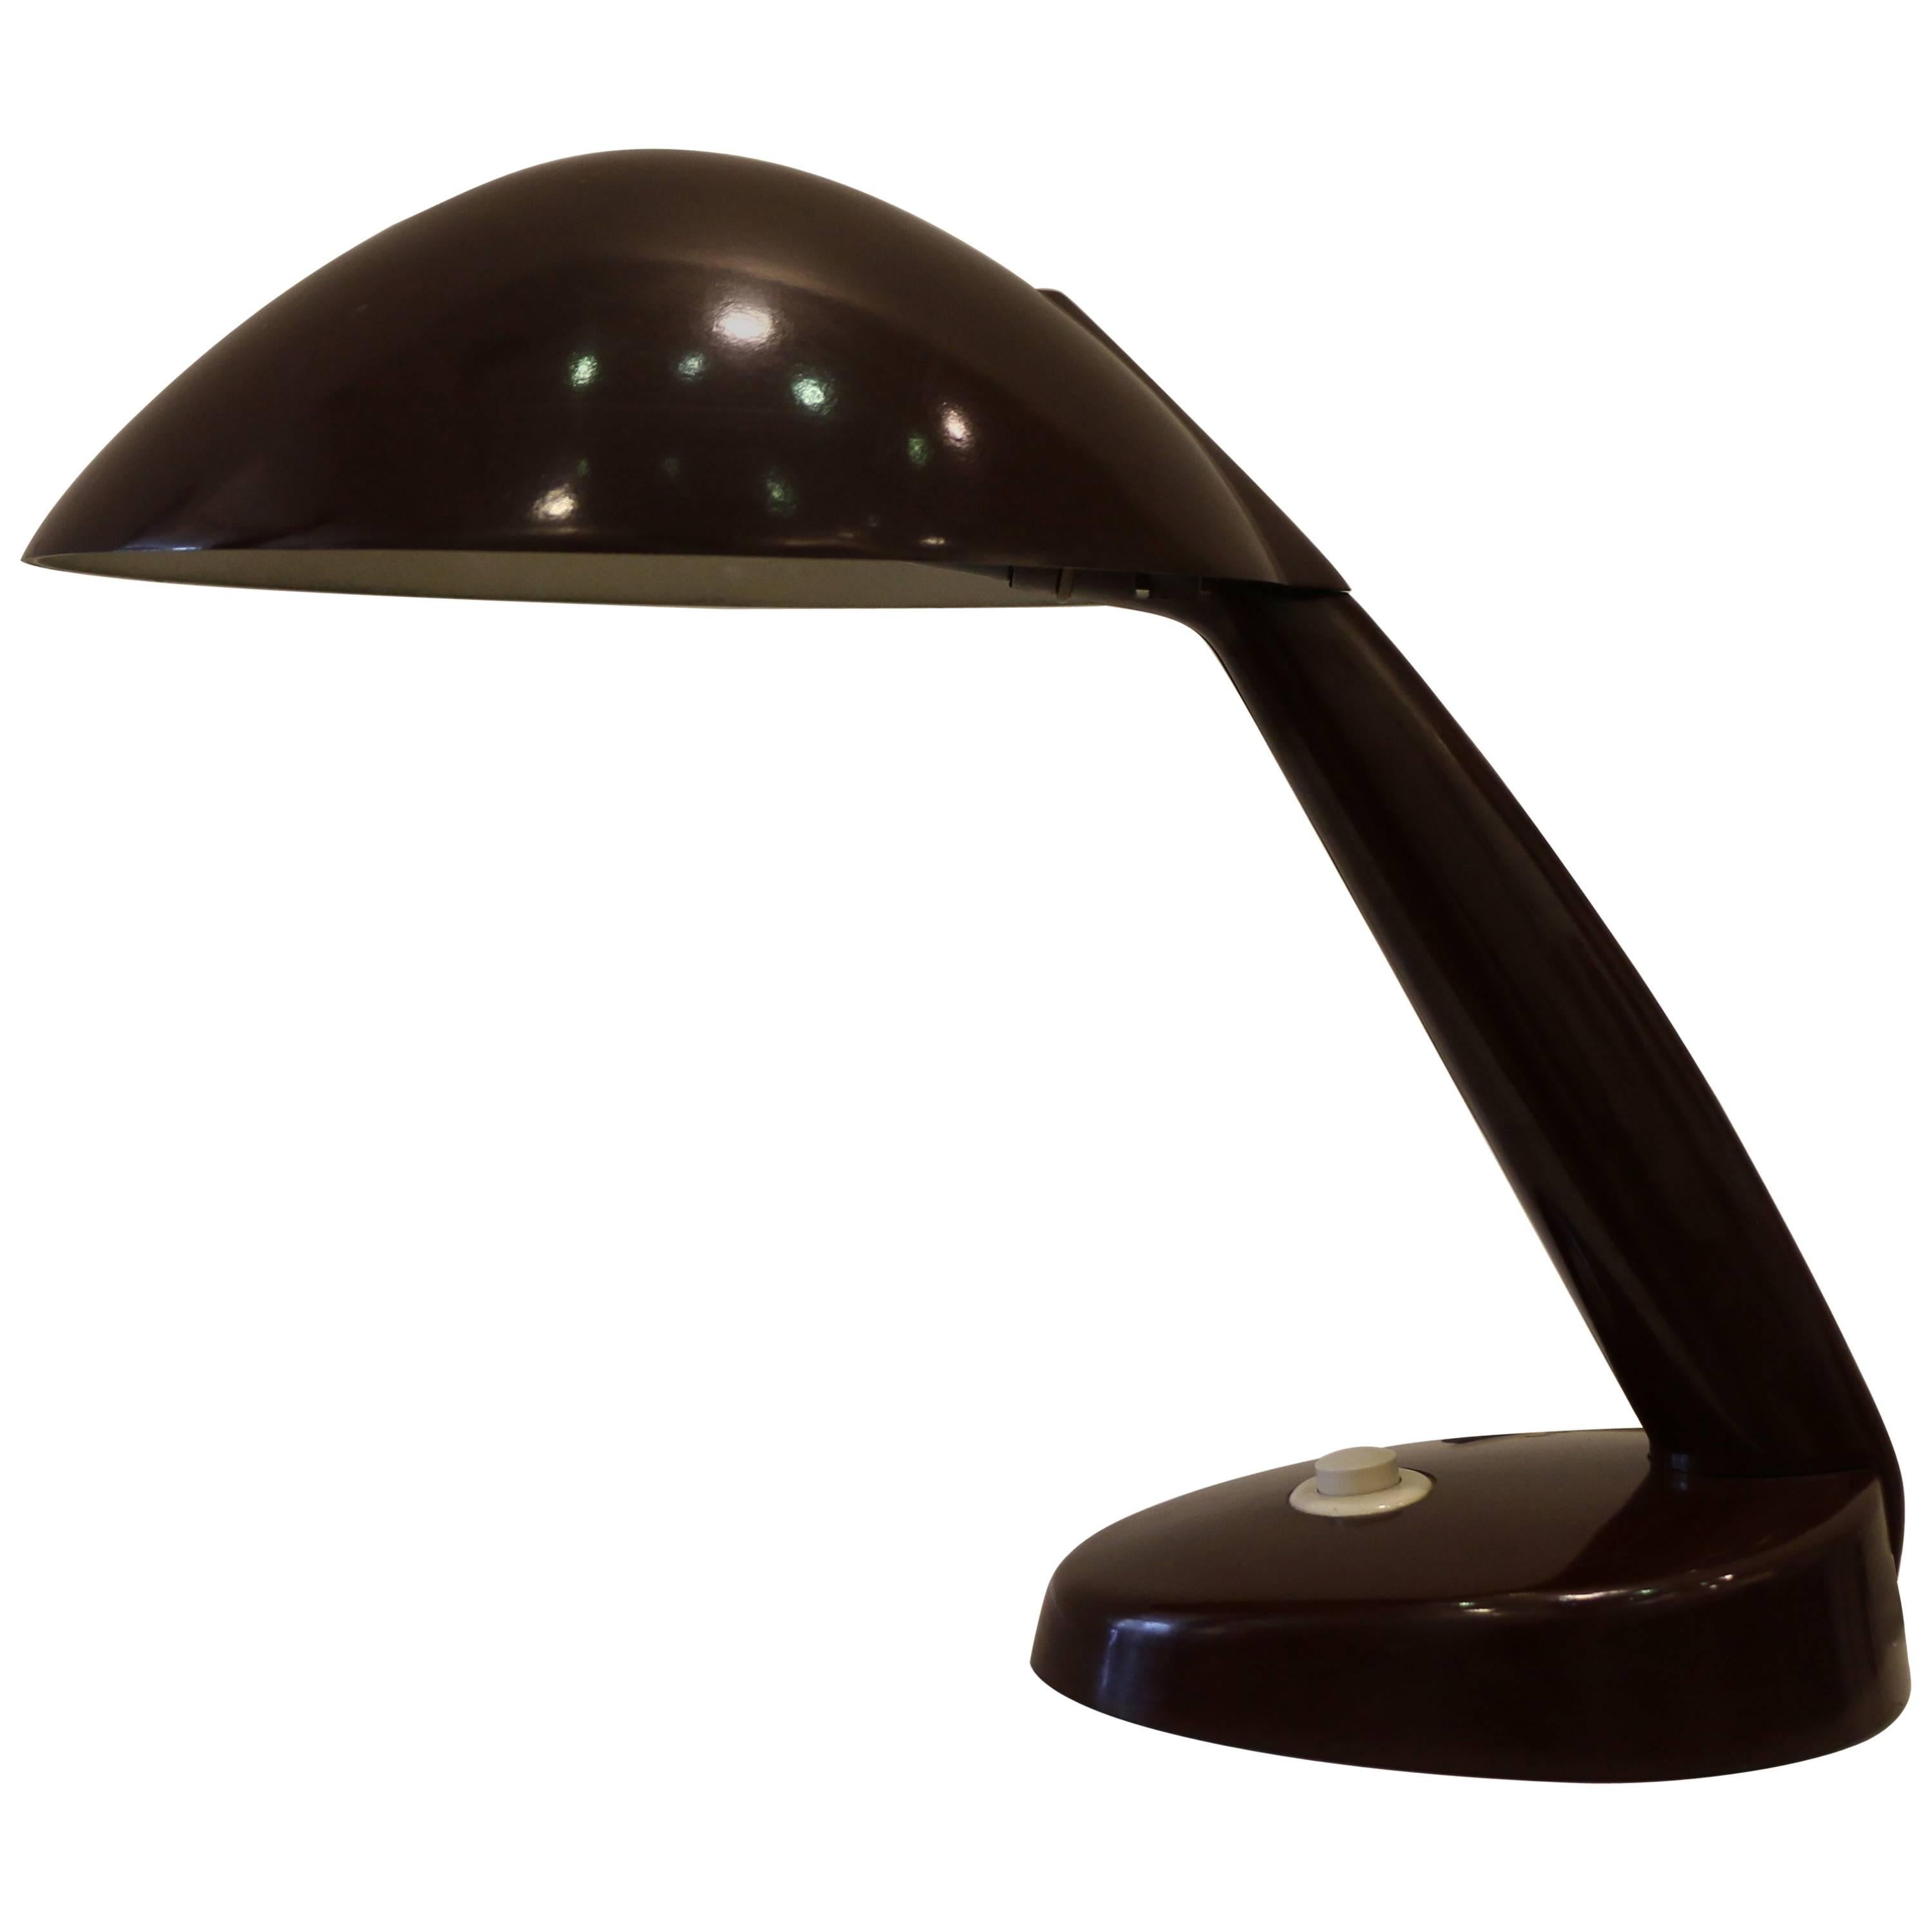 Rare Kandem Bakelite Table Lamp Attributed to Marianne Brandt, circa 1945 For Sale